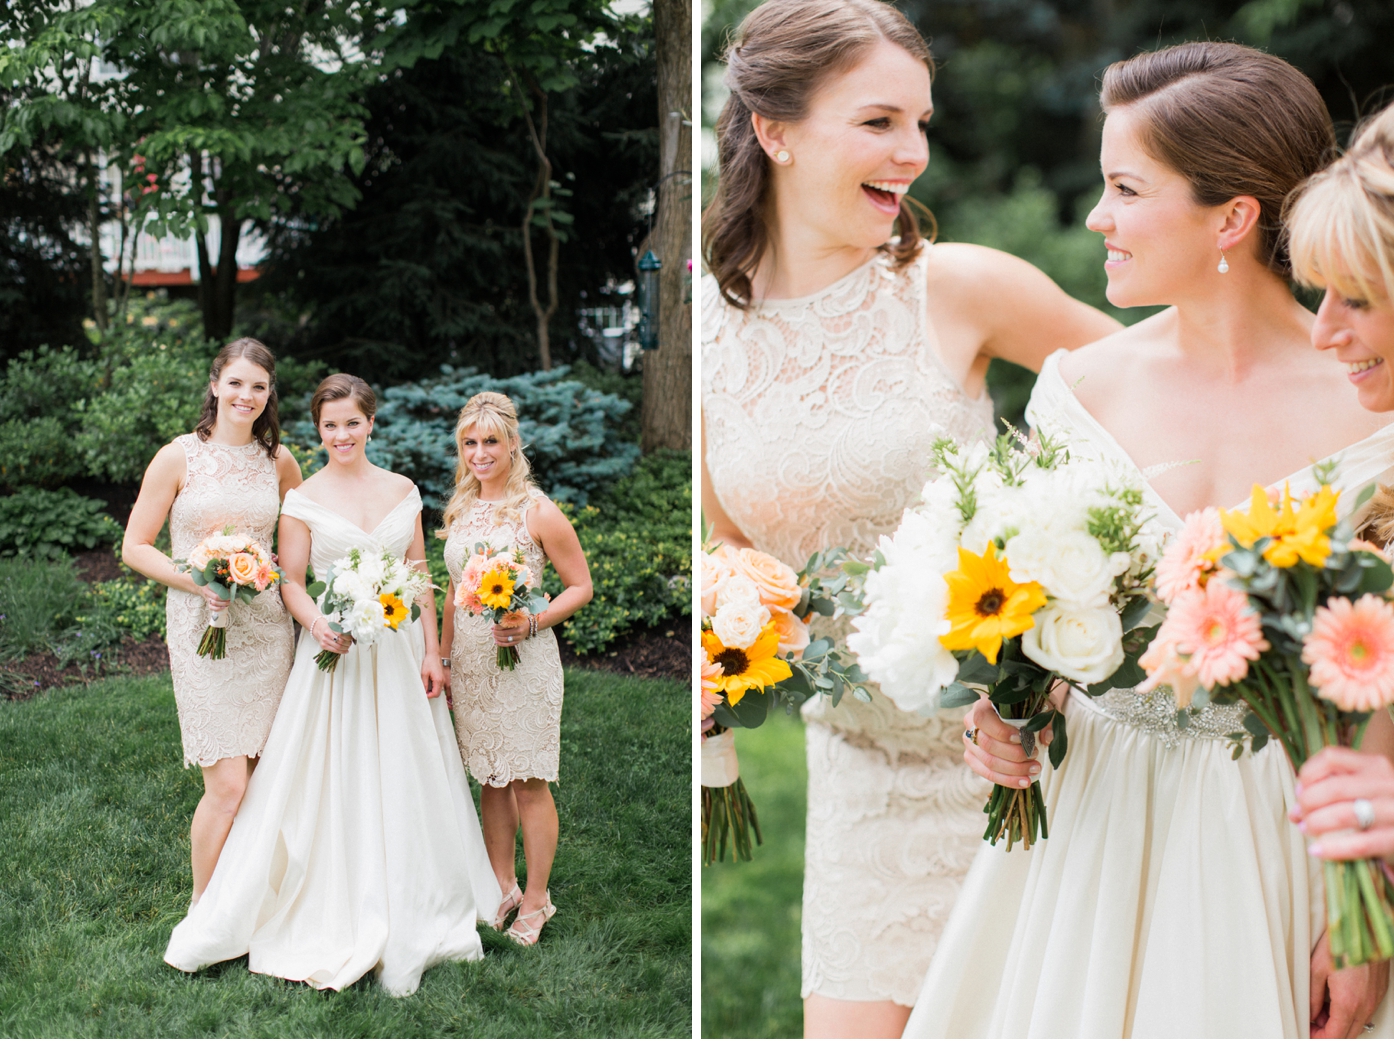 Sunflower in their bouquet to remember a loved one | Kentland Mansion Wedding by Alisandra Photography